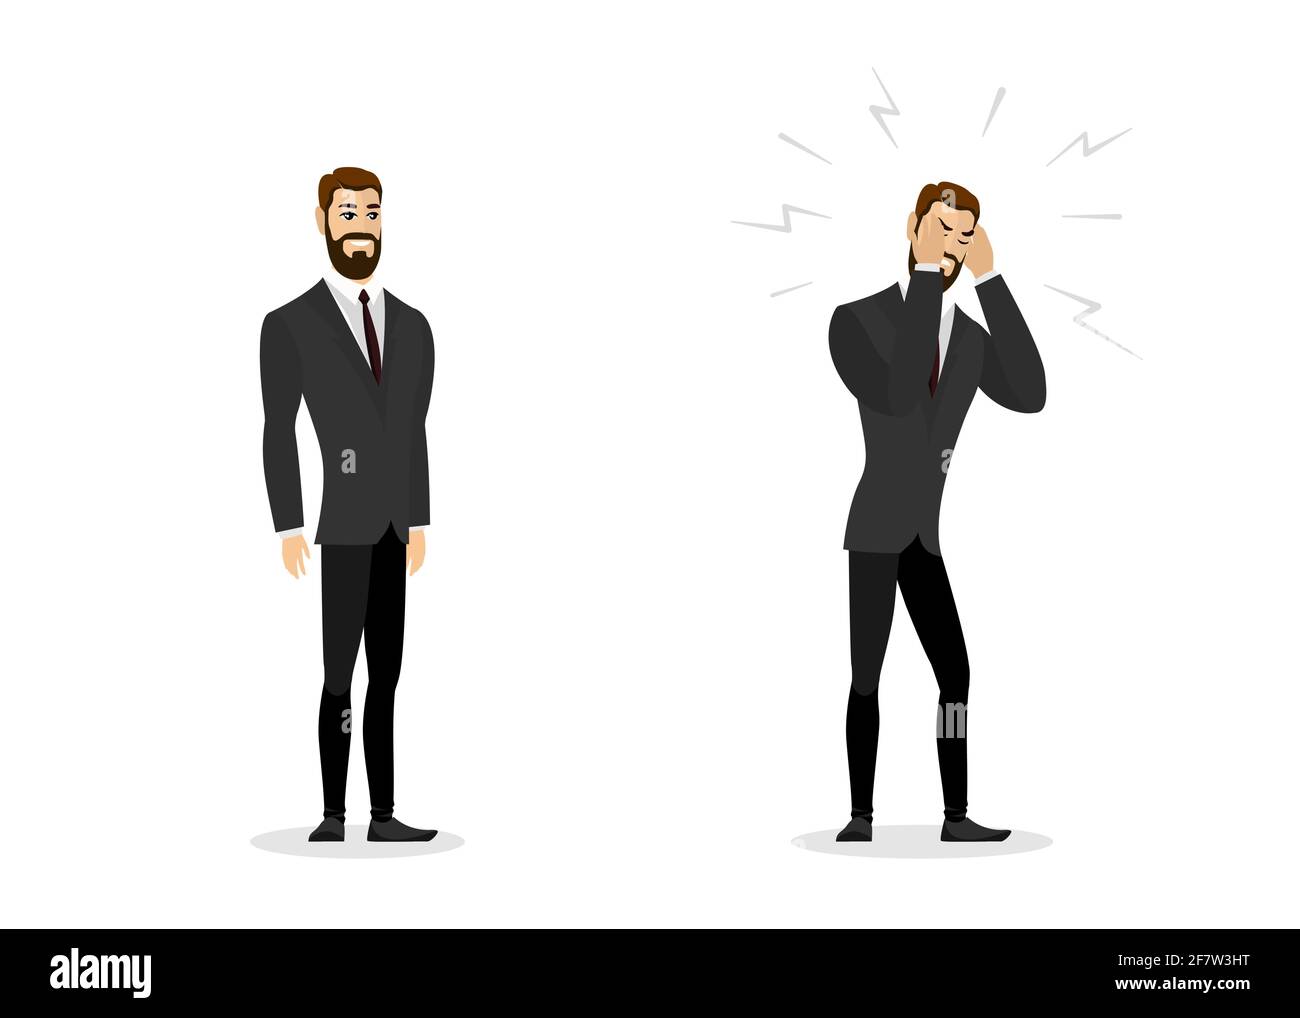 Happy healthy successful prosperous calm contented businessman and sick stressful frustrated business person with migraine, headache and work problems. Professional career compare vector illustration Stock Vector